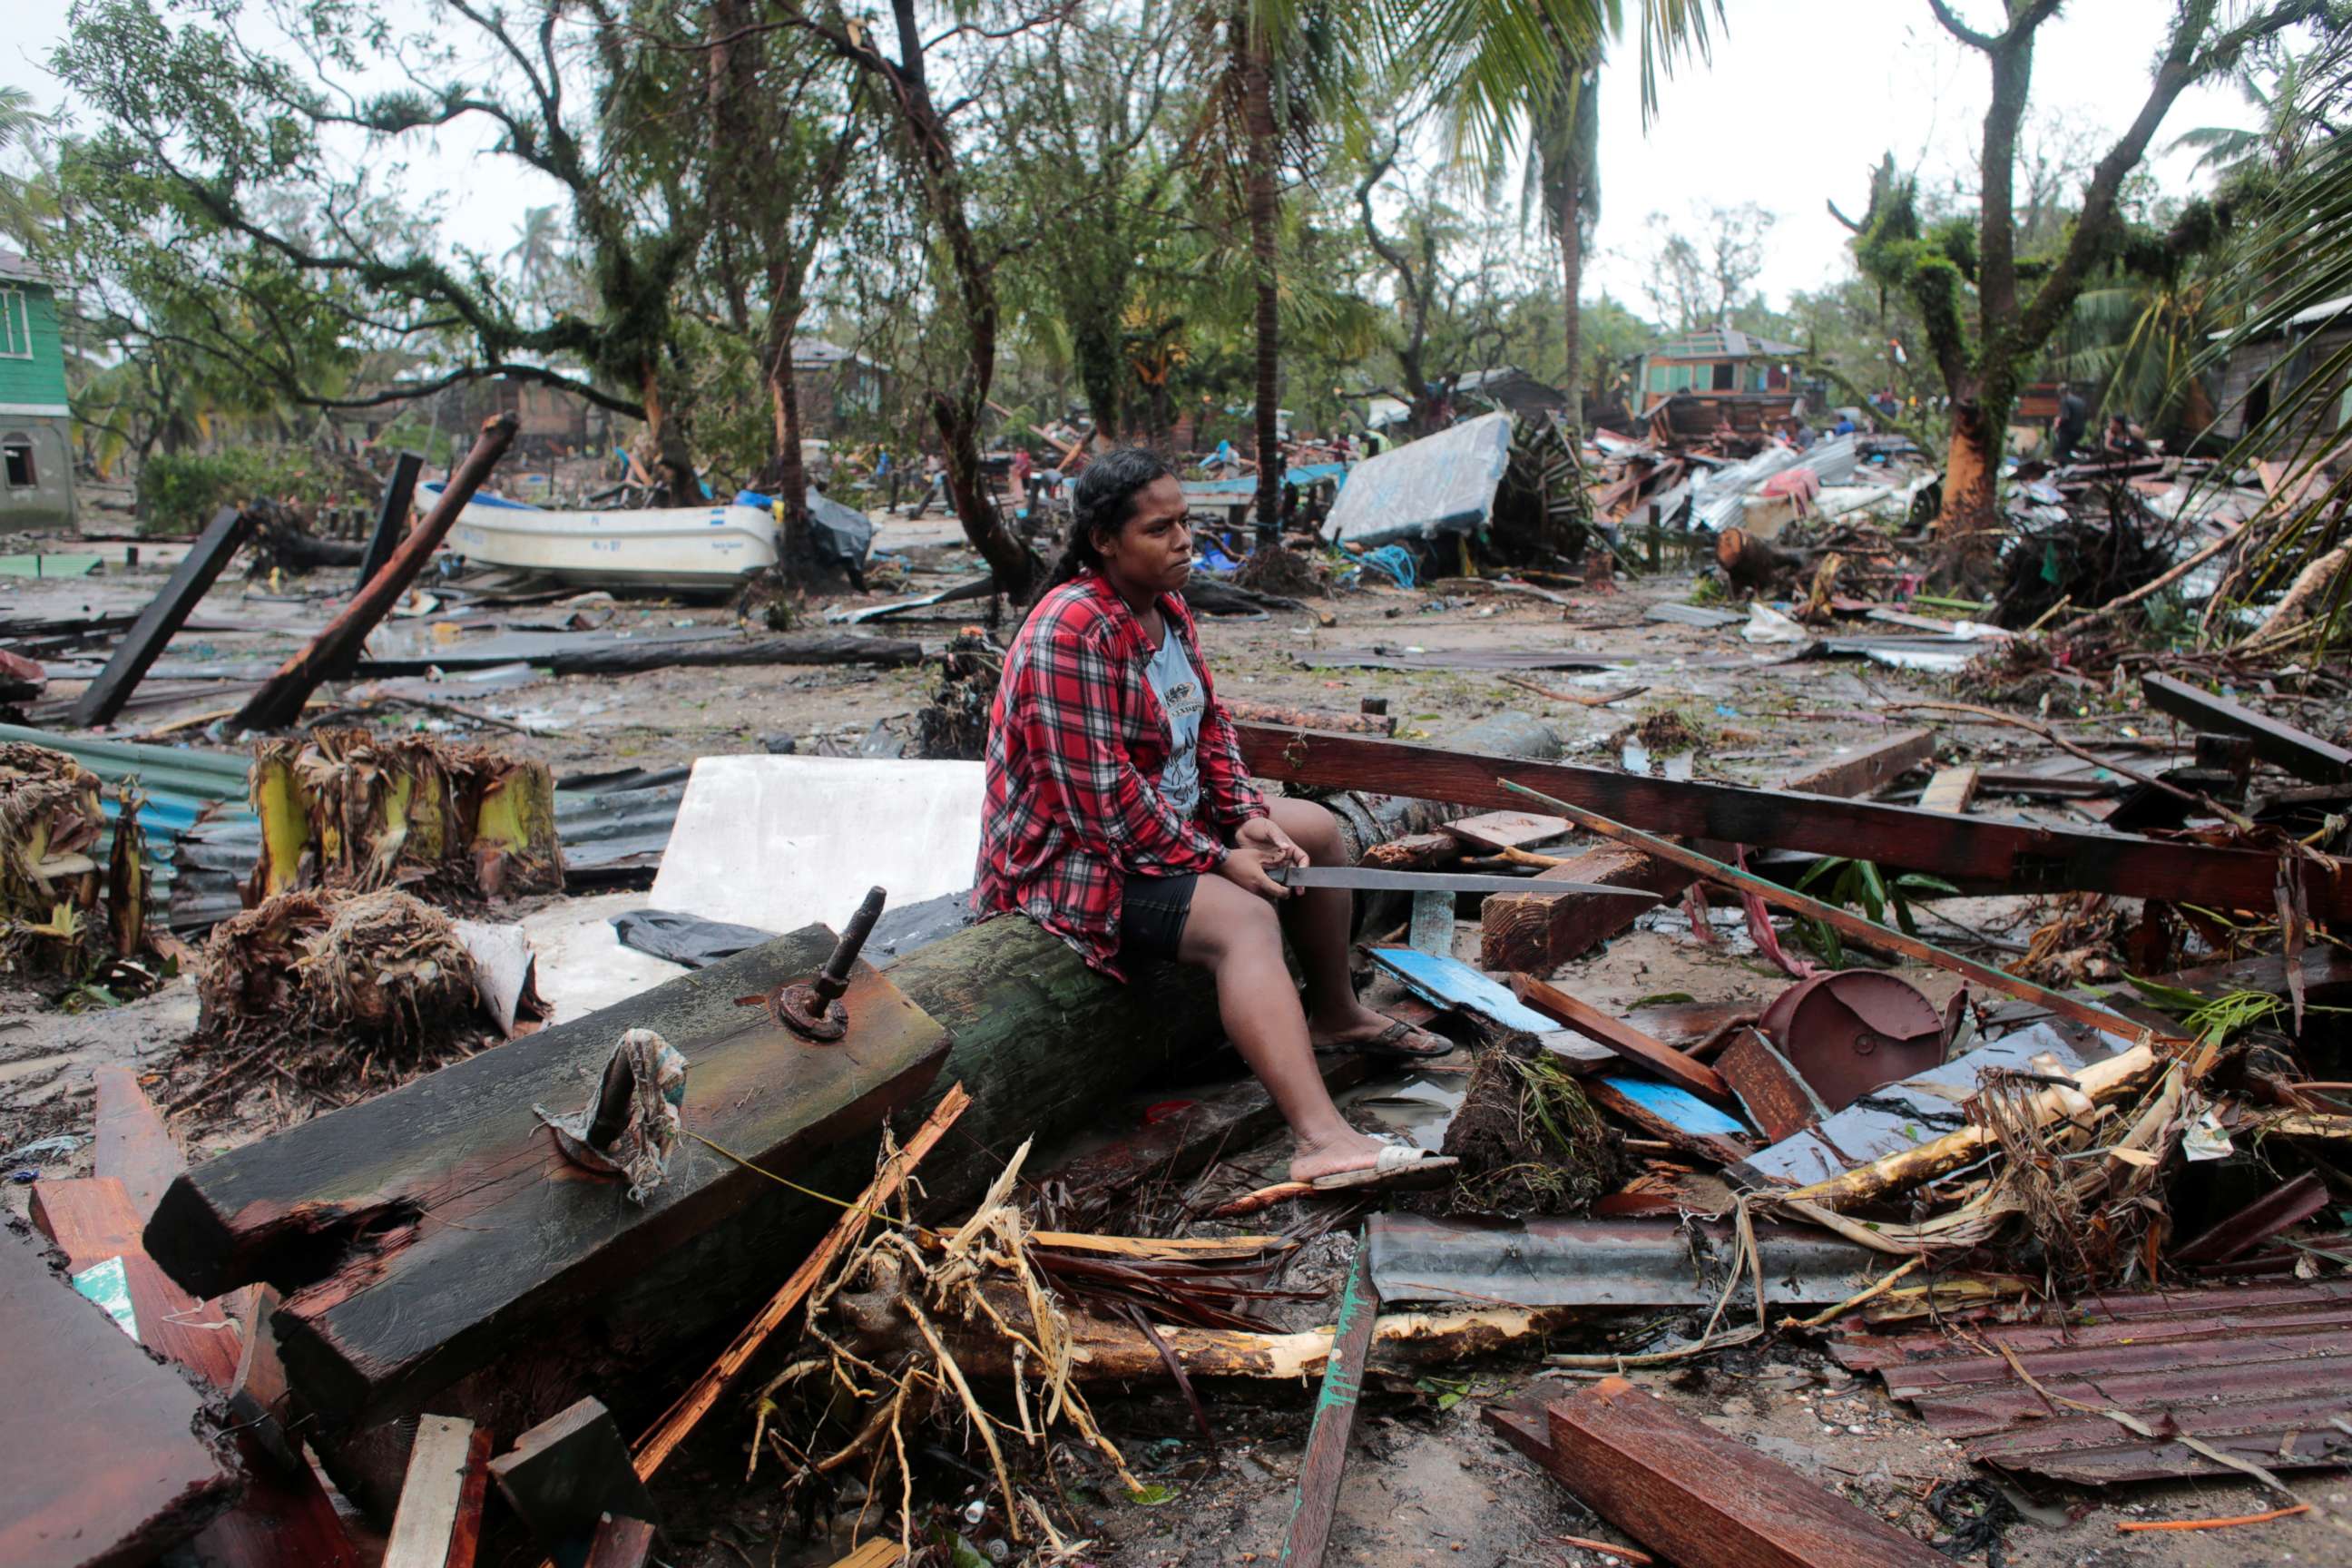 PHOTO: A woman sits on a toppled energy pole while contemplating her house destroyed in the passing of Hurricane Iota, in Puerto Cabezas, Nicaragua, Nov. 17, 2020.